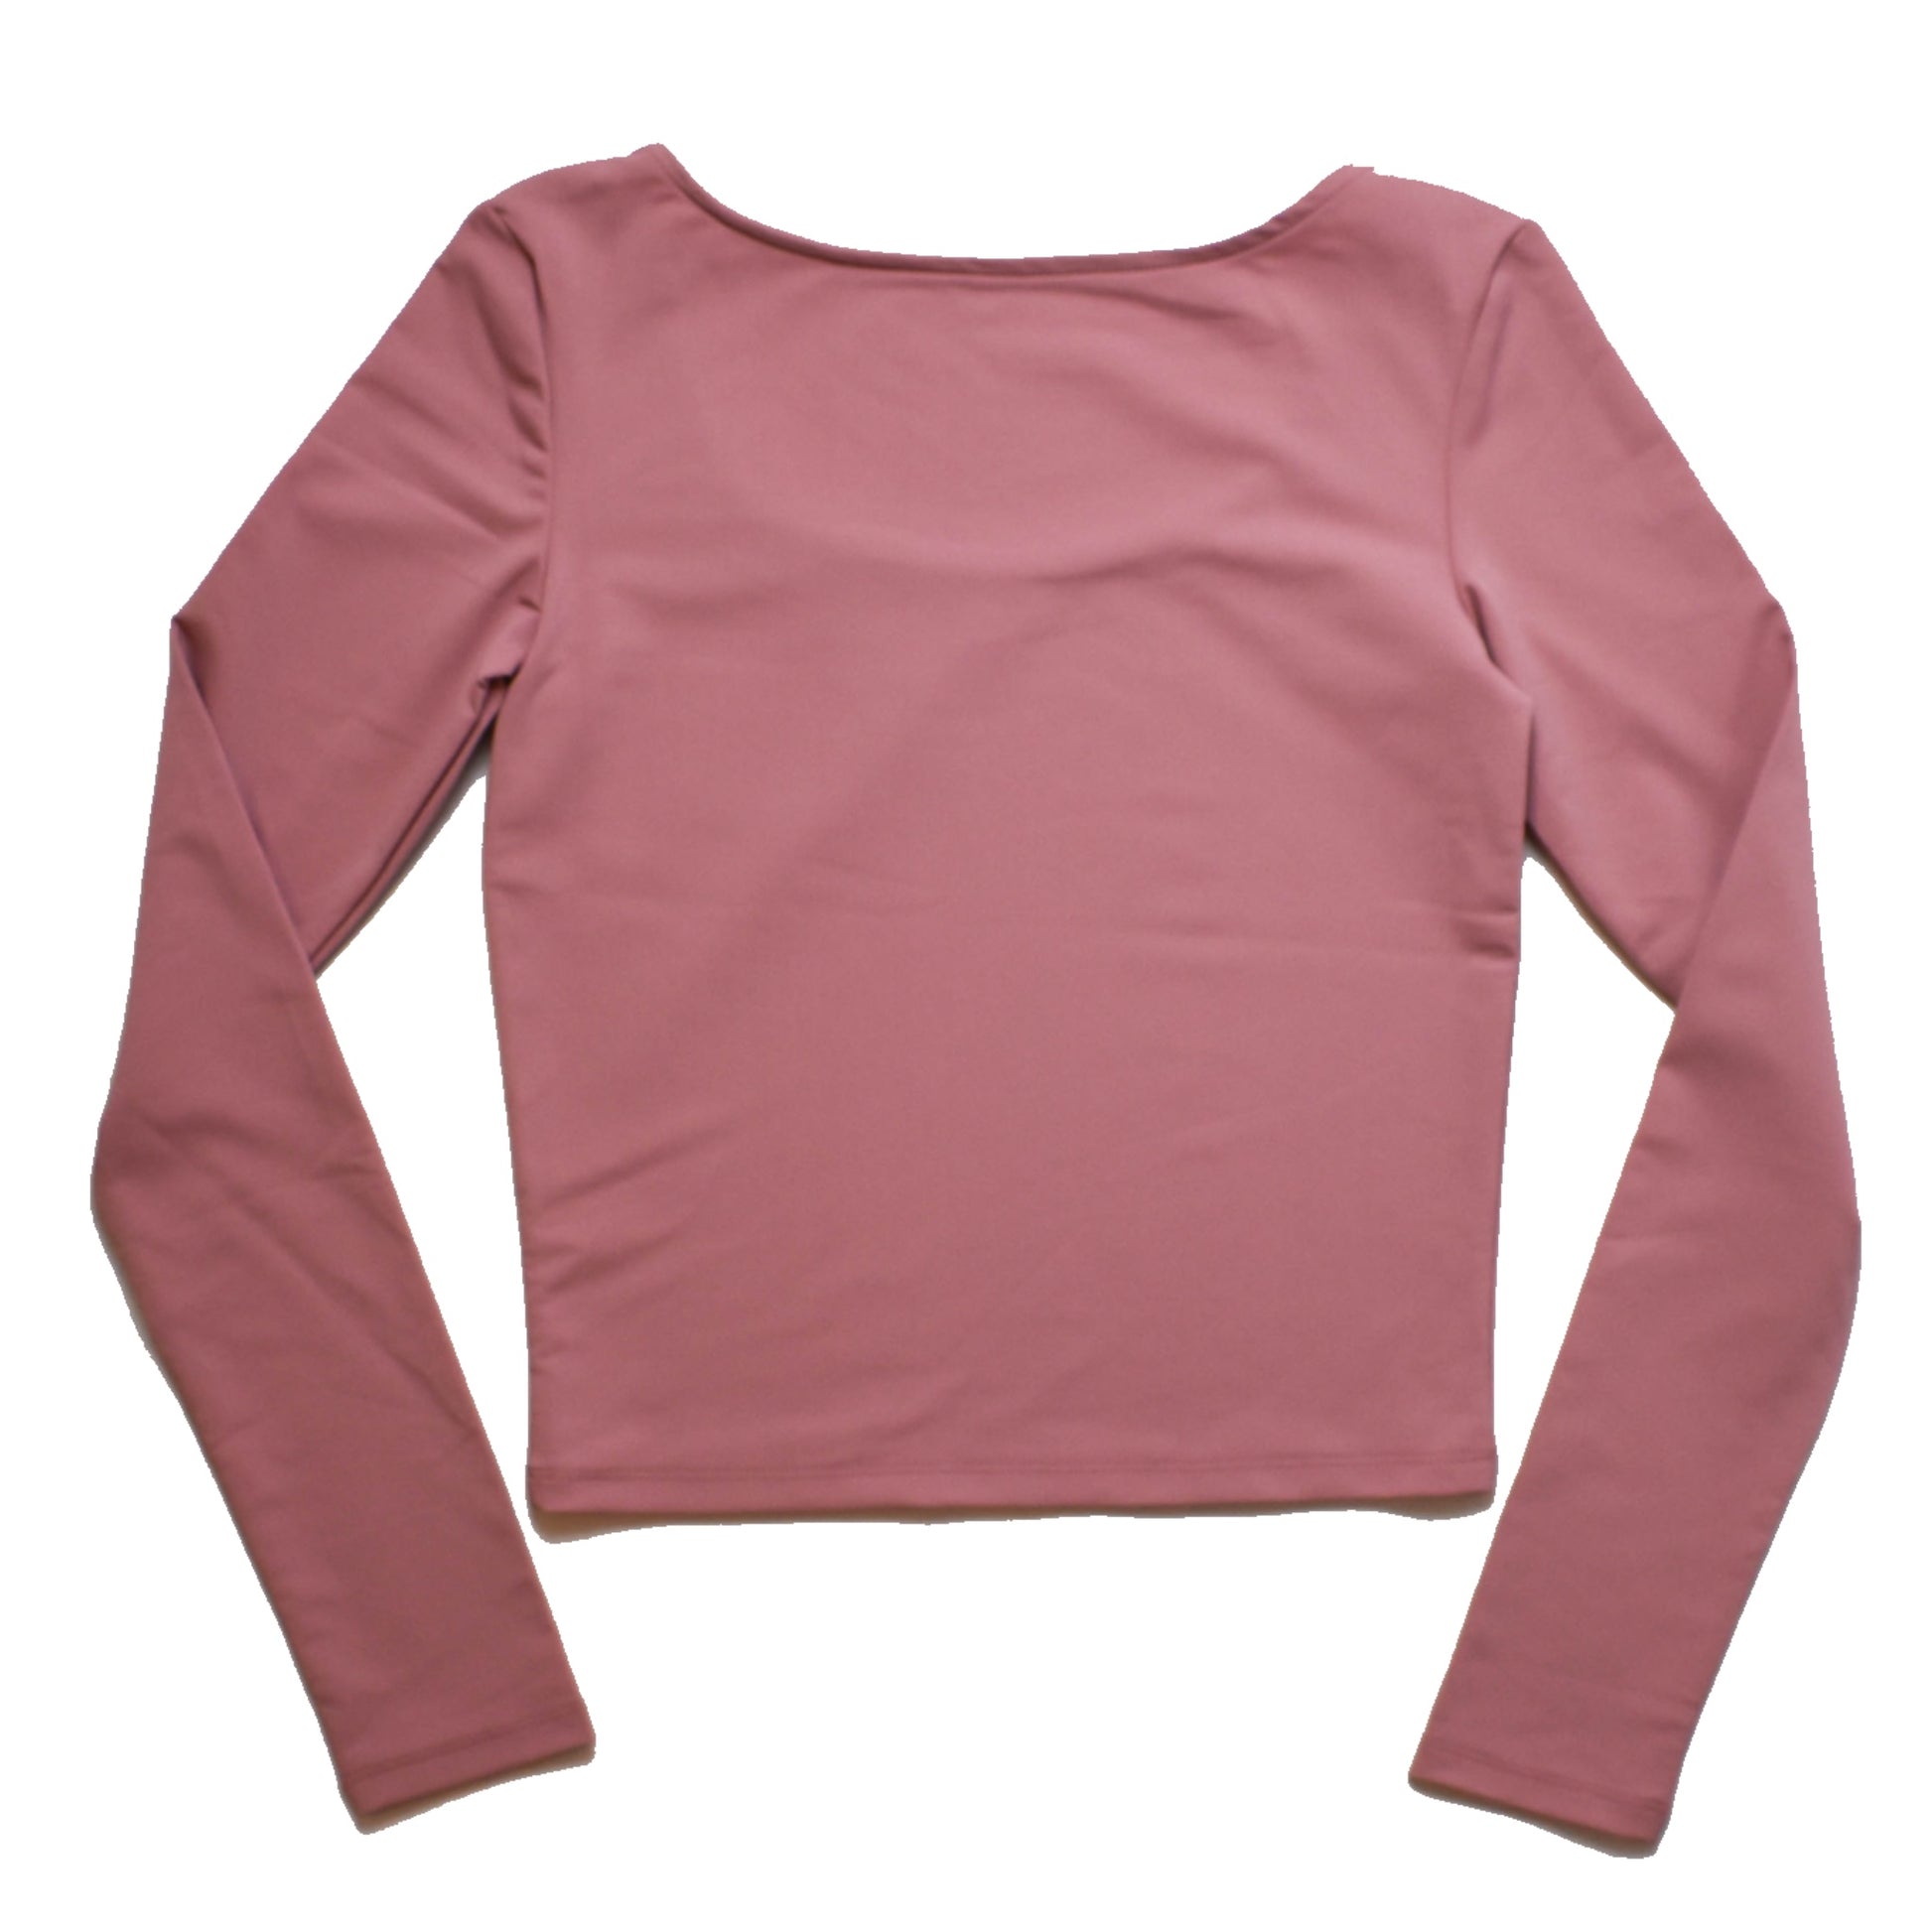 Rosa Rose Reversible High Neck and Scoop Neck UPF 50+ Women's Long Sleeve Versatile Sun Protective Top